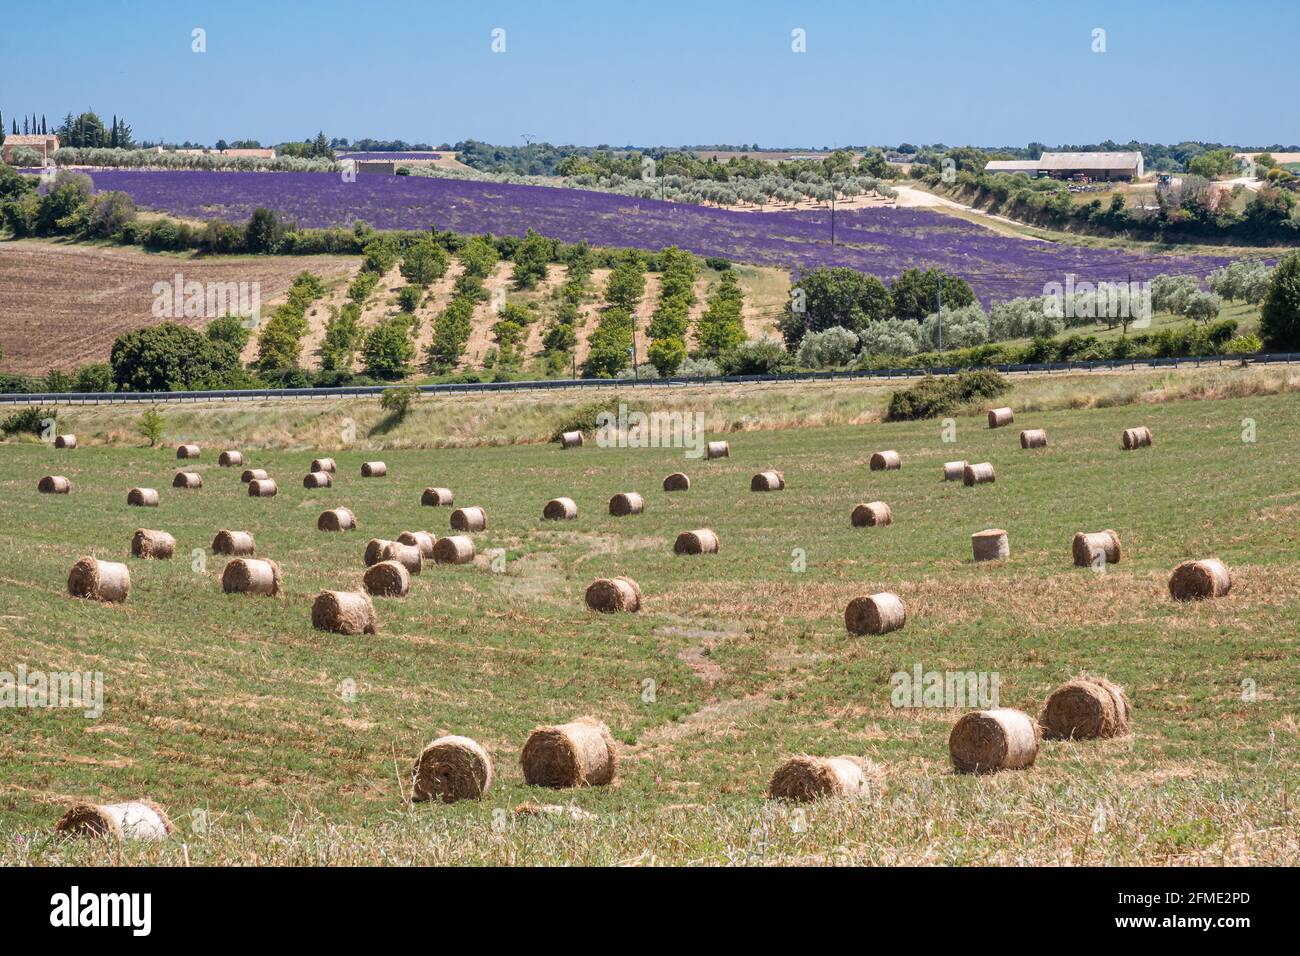 Valensole, France - July 5, 2020: View of the Plateau de Valensole: hay bales, lavender fields, olive trees. Stock Photo